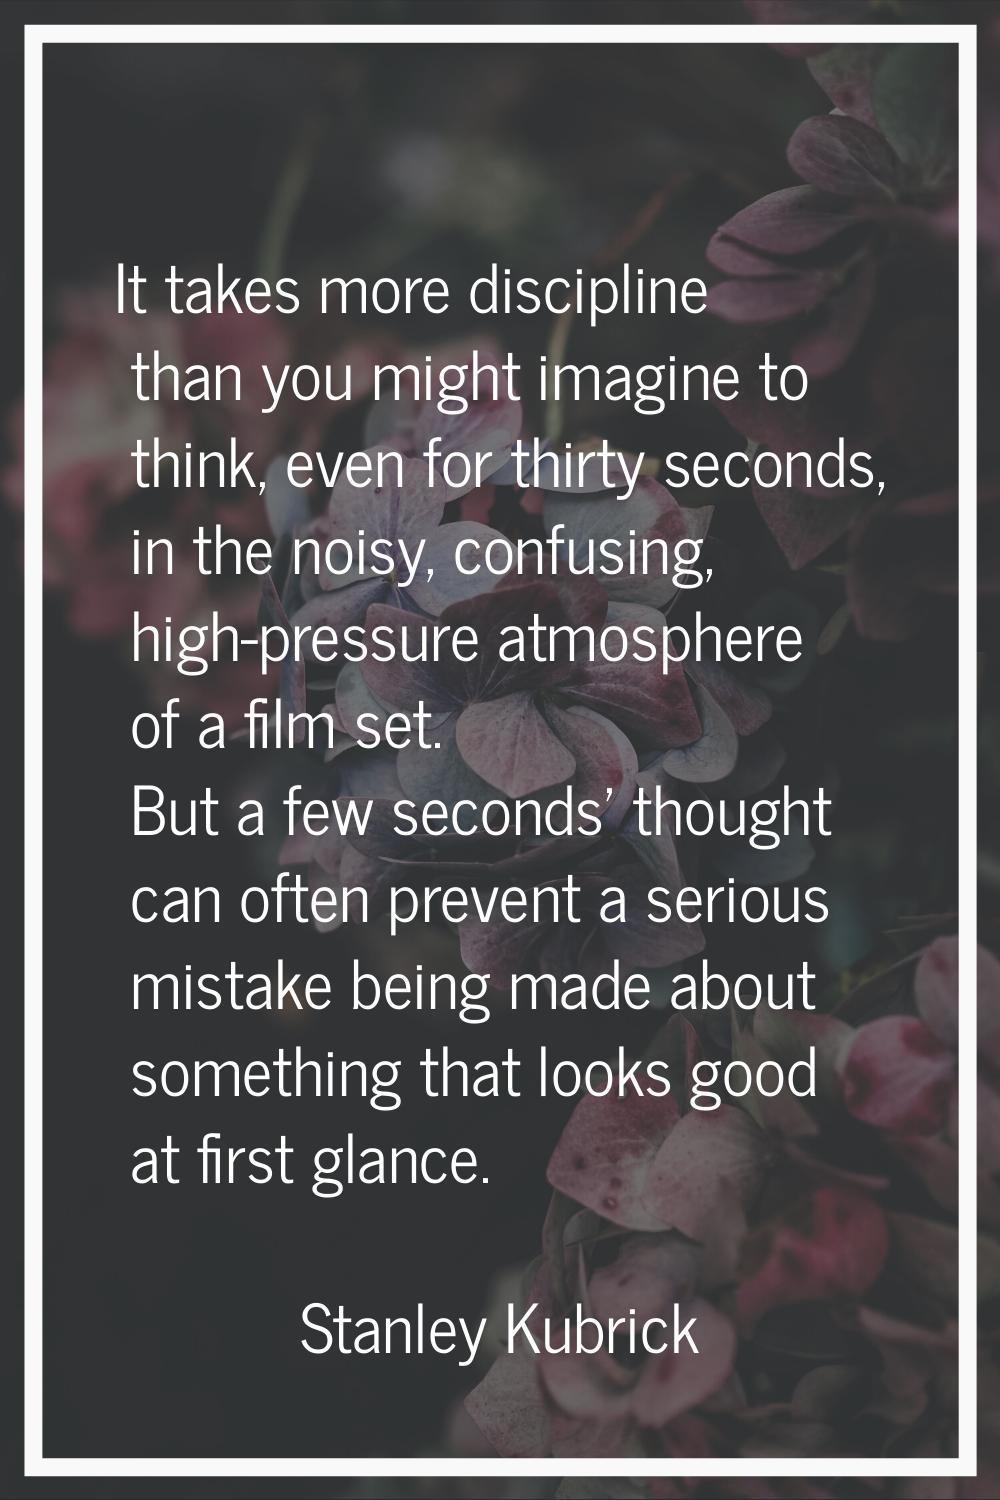 It takes more discipline than you might imagine to think, even for thirty seconds, in the noisy, co